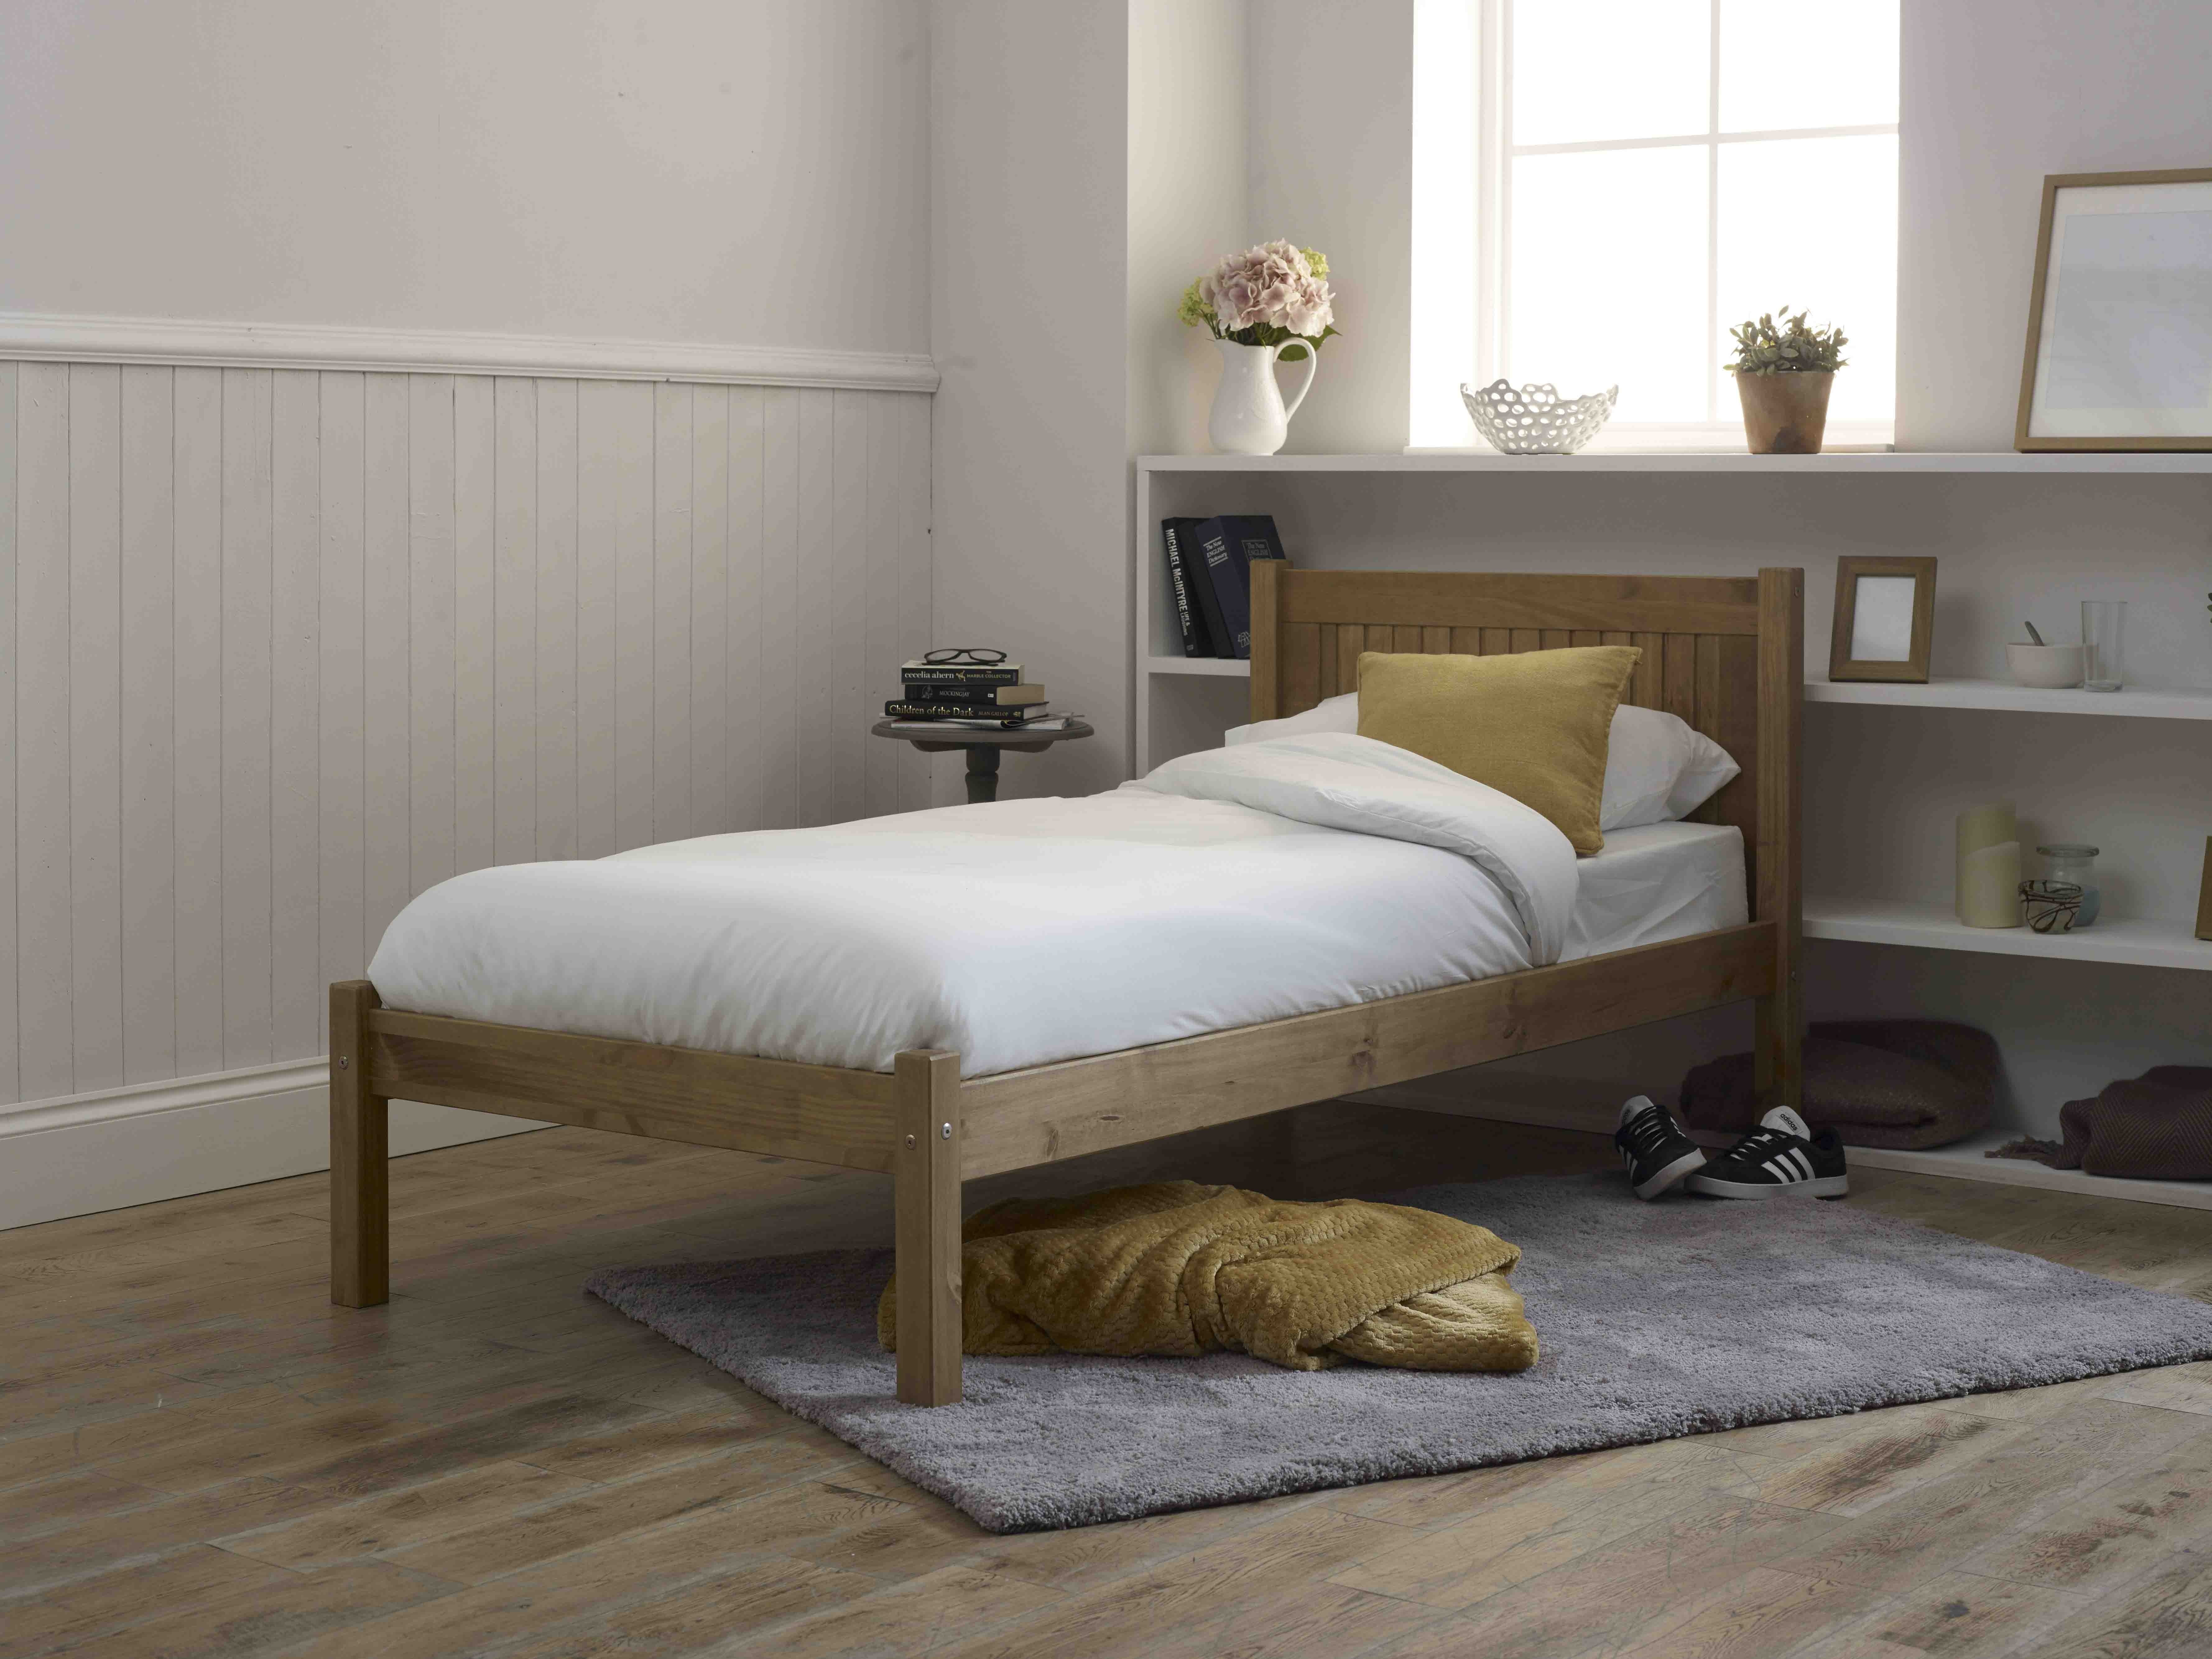 Capricorn Wooden Bed Frame Assembly Instructions (Limelight)